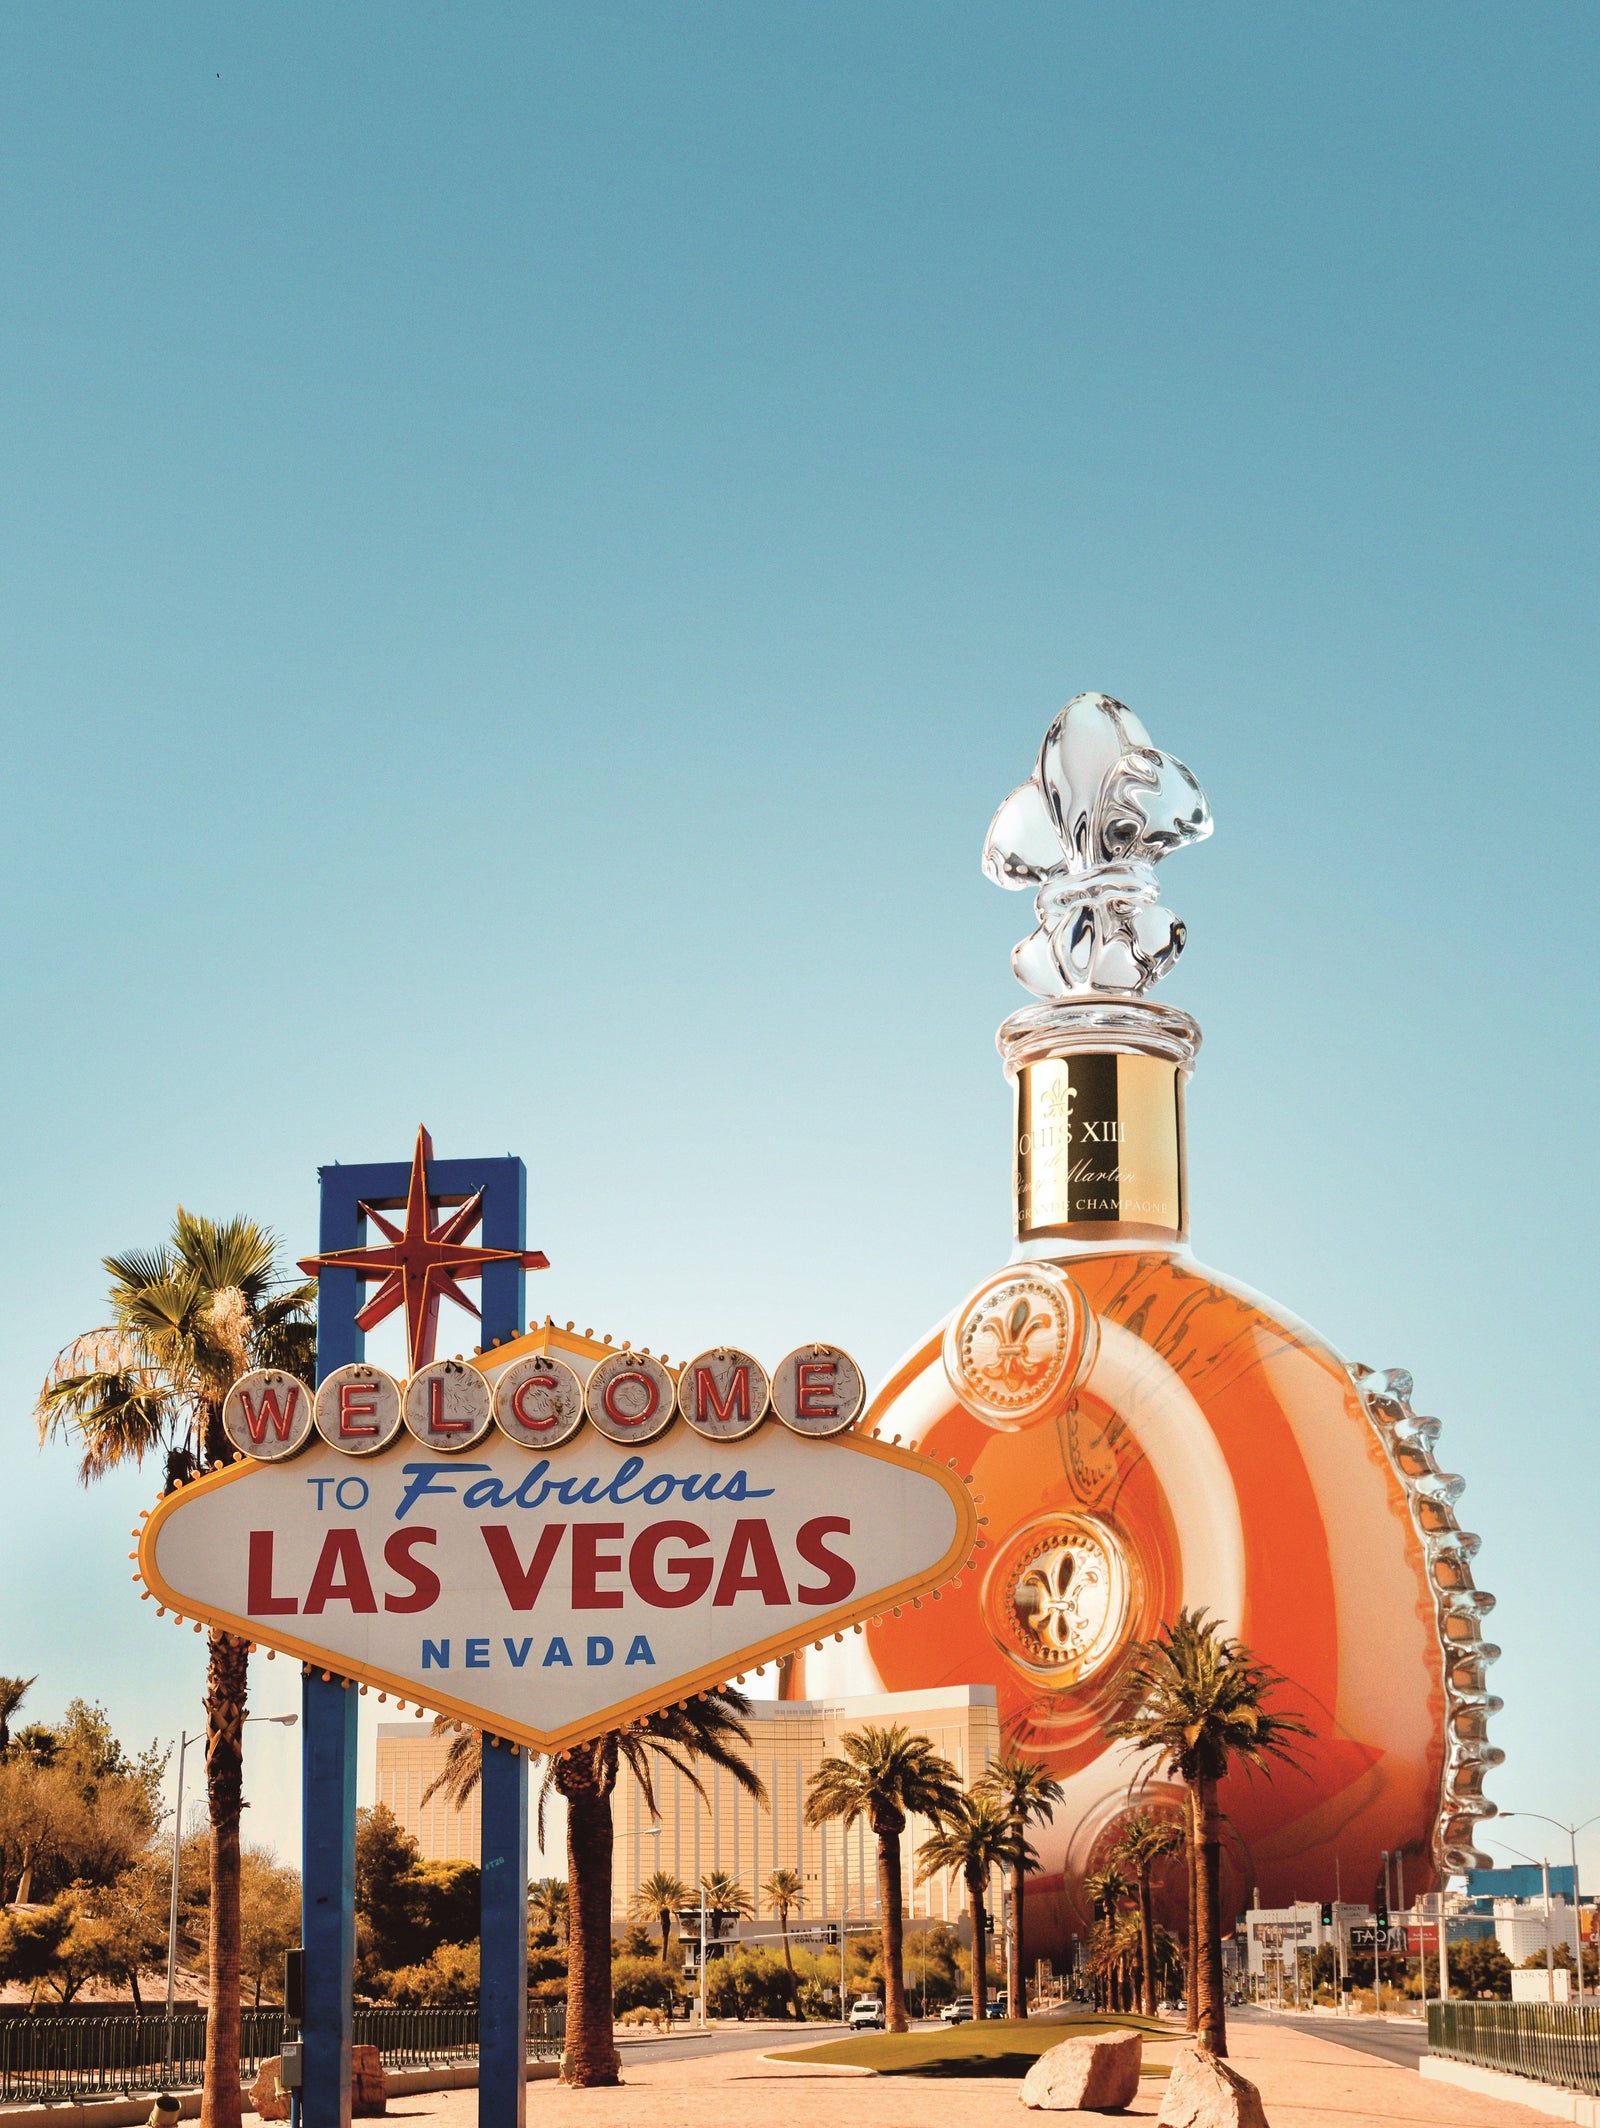 LOUIS XIII Cognac Takes Over Las Vegas with an Exclusive Pop-up Boutique at Wynn Resort & Casino